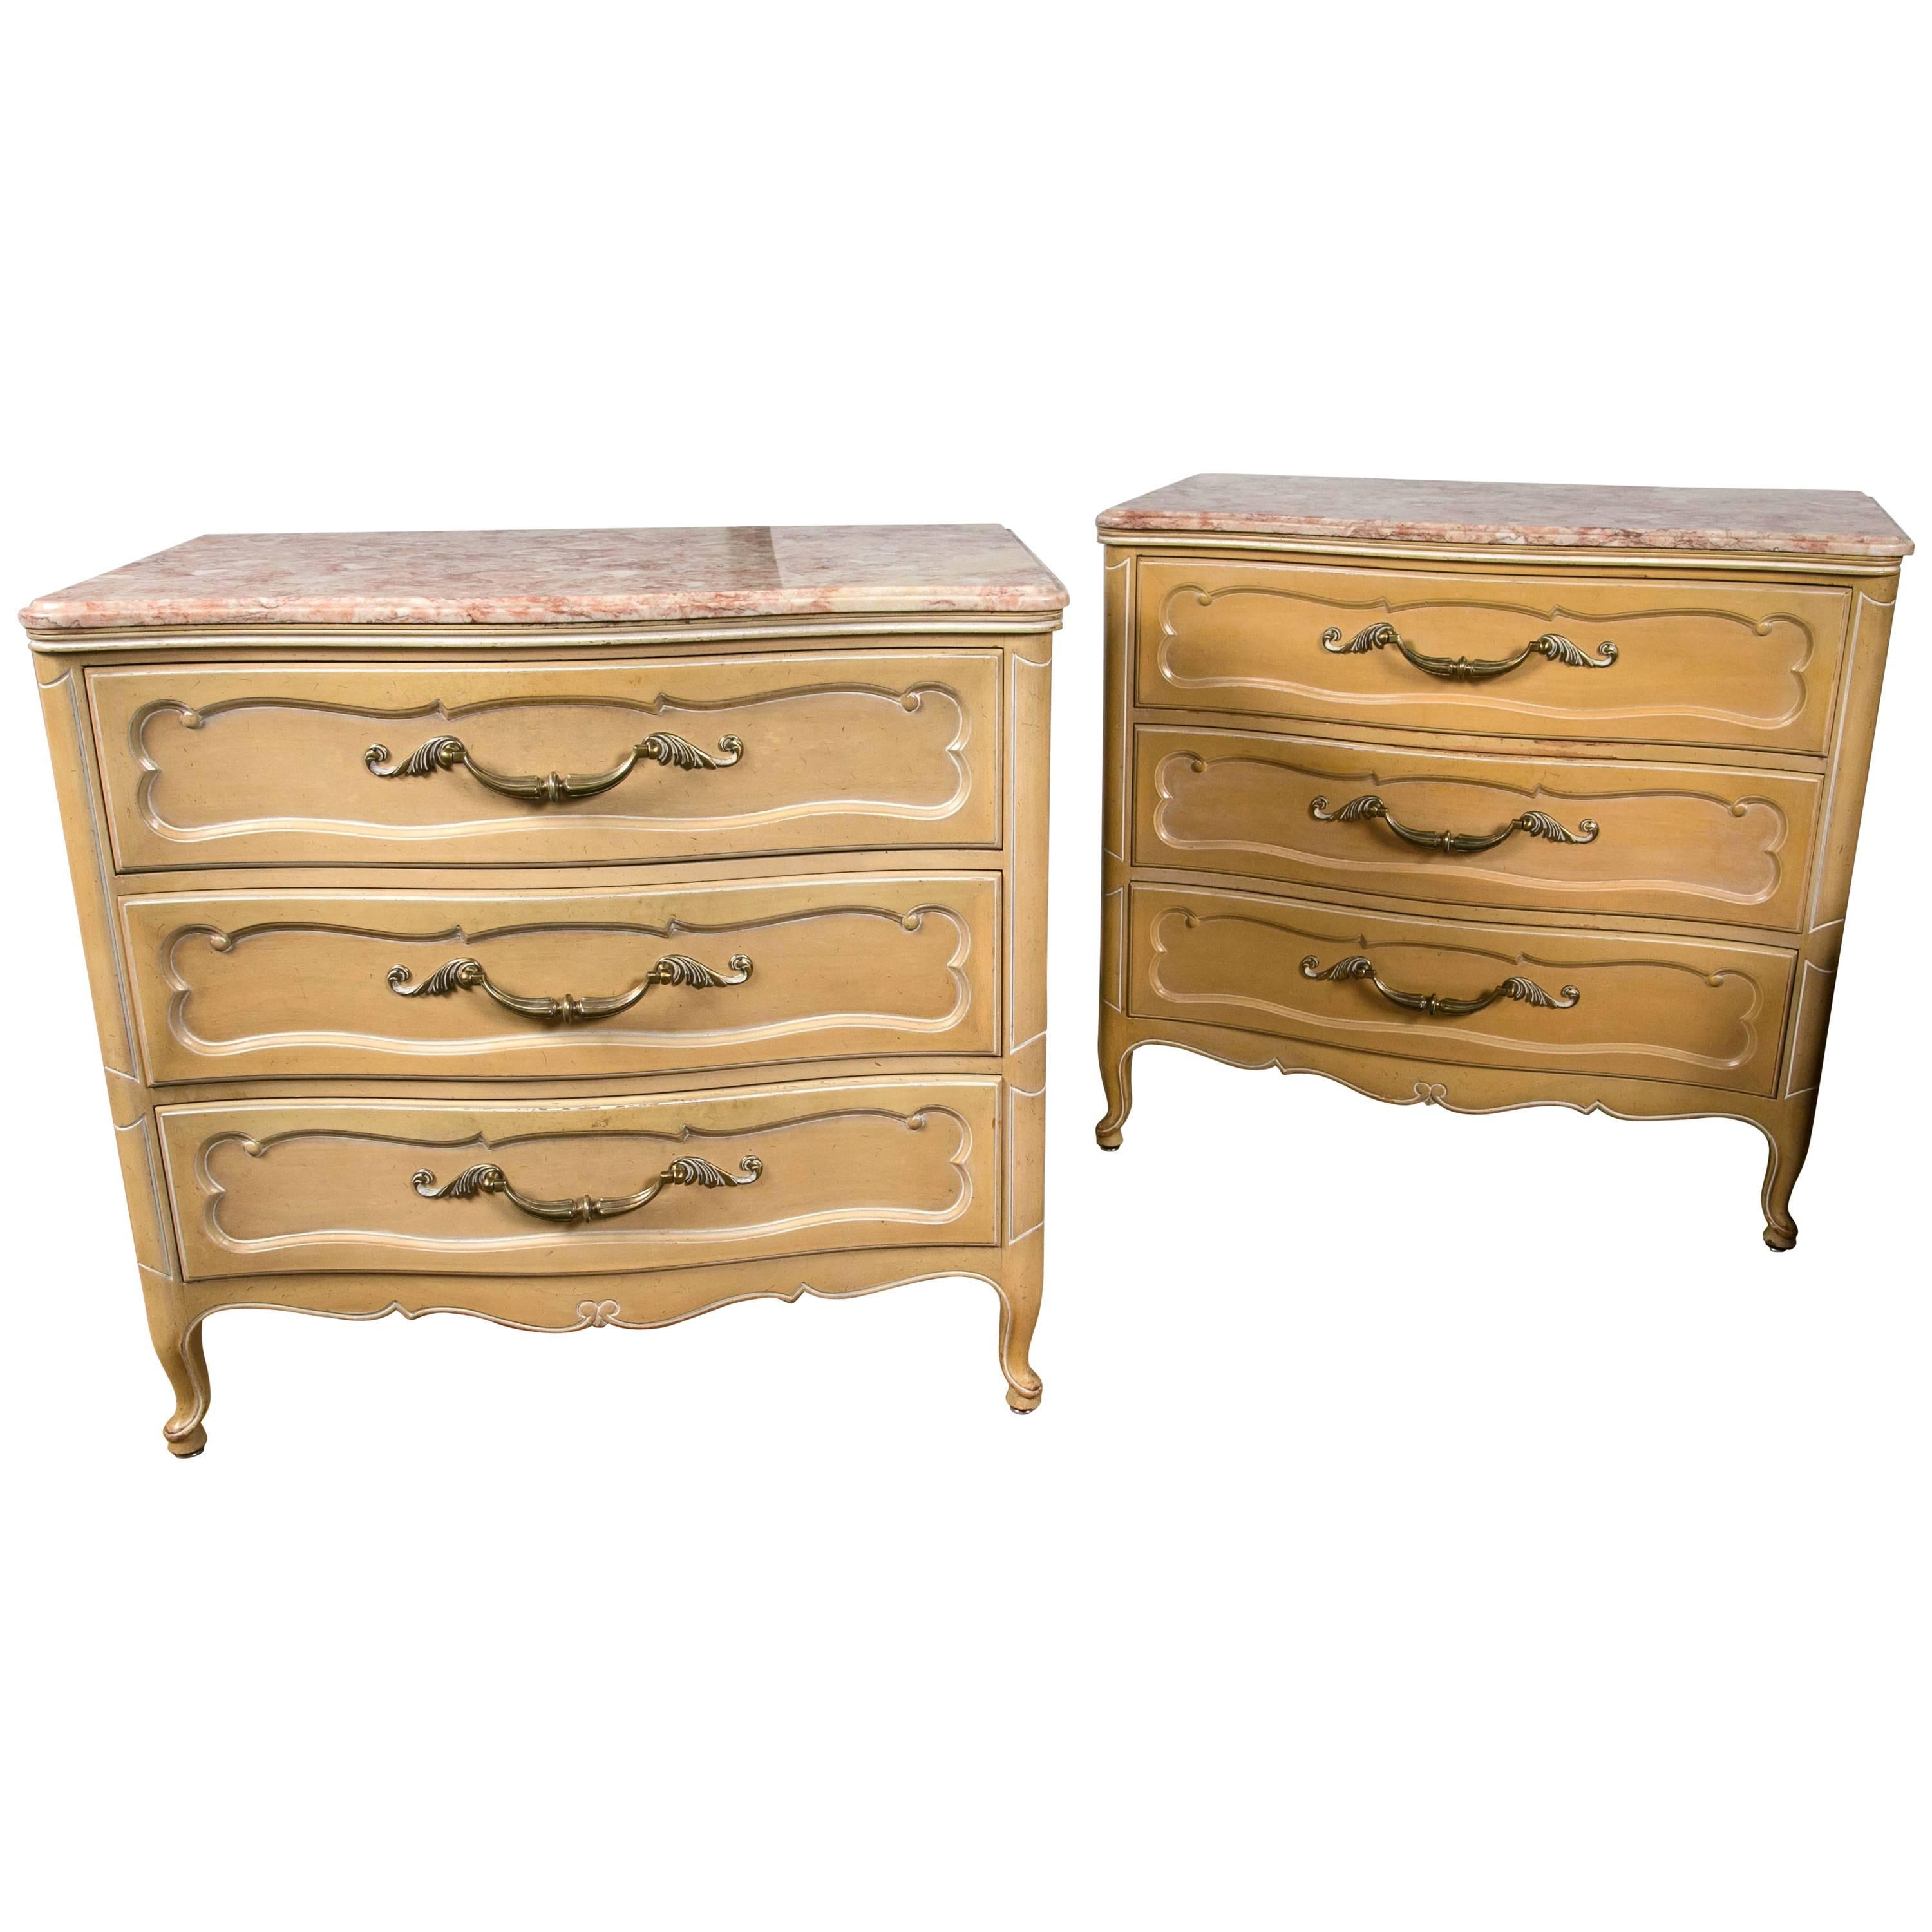 American Pair Of Louis XV Style Grosfeld House Marble-Top Distressed Four-Drawer Commodes For Sale